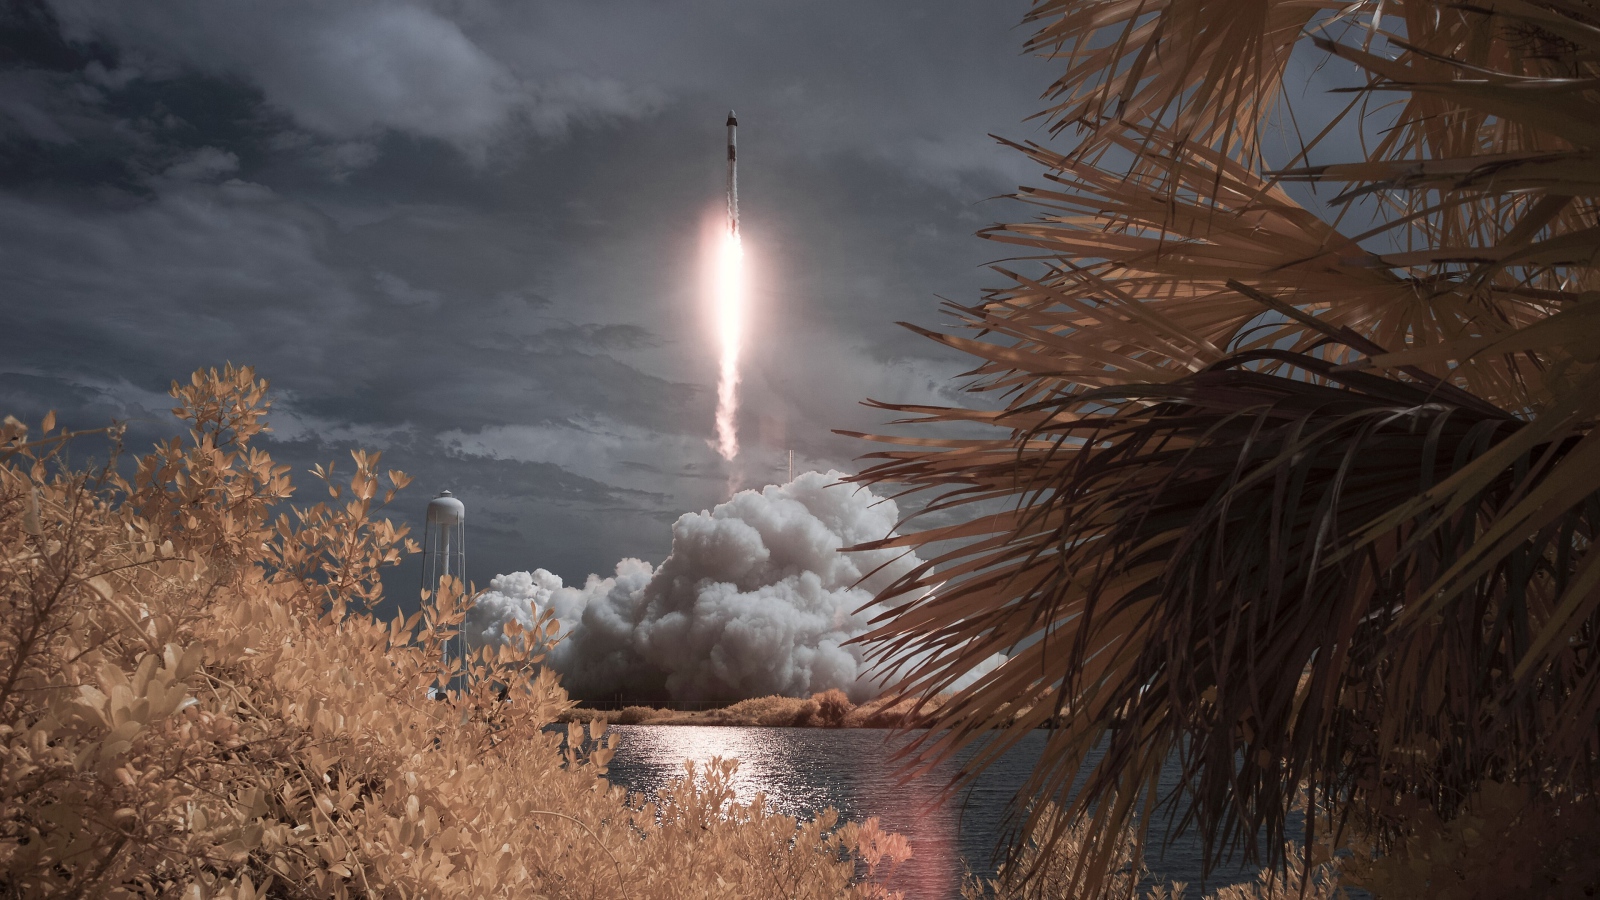 The Falcon 9 rocket takes off from the cosmodrome